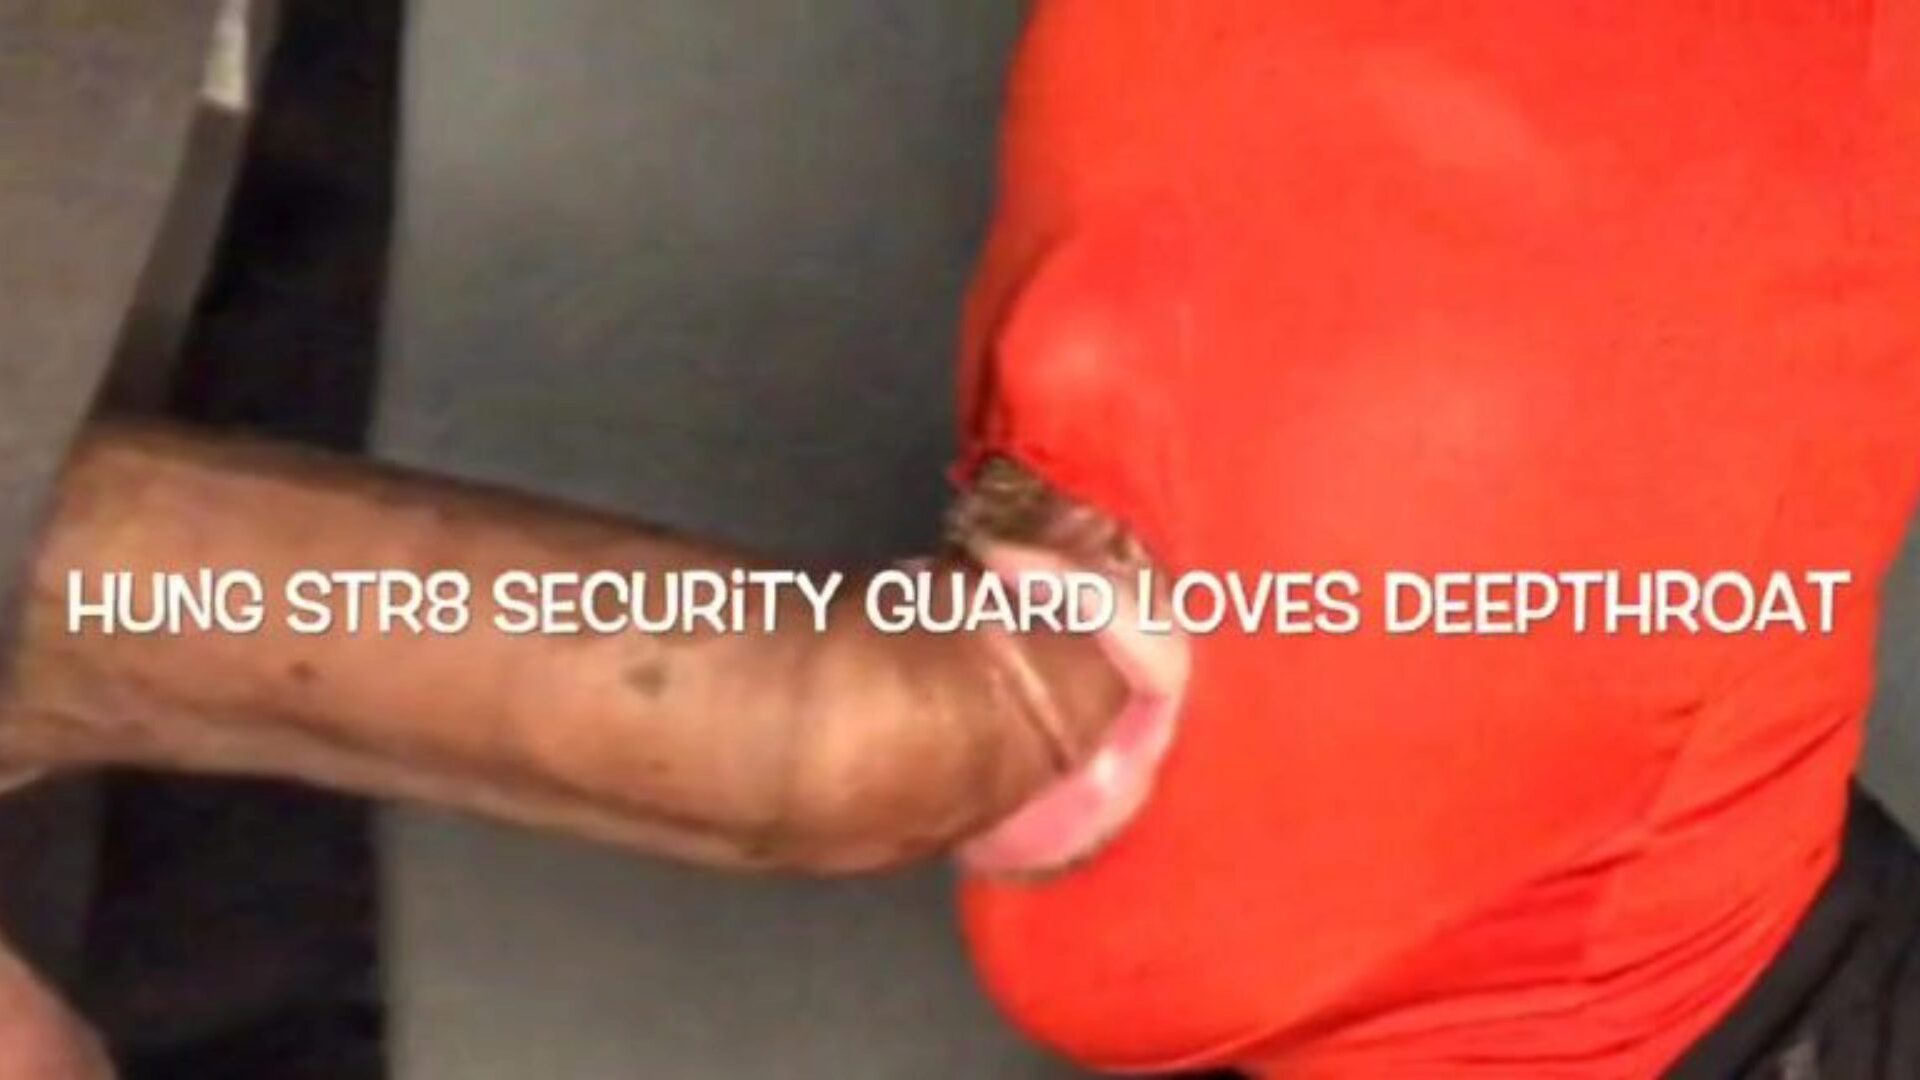 Hung Straight Security Guard Likes Deepthroat | XTube Porn Movie from soopersuckr See Hung Straight Security Guard Likes Deepthroat on Xtube, the world's most awesome pornography tube with the best selection of porno episodes and gay XXX clips